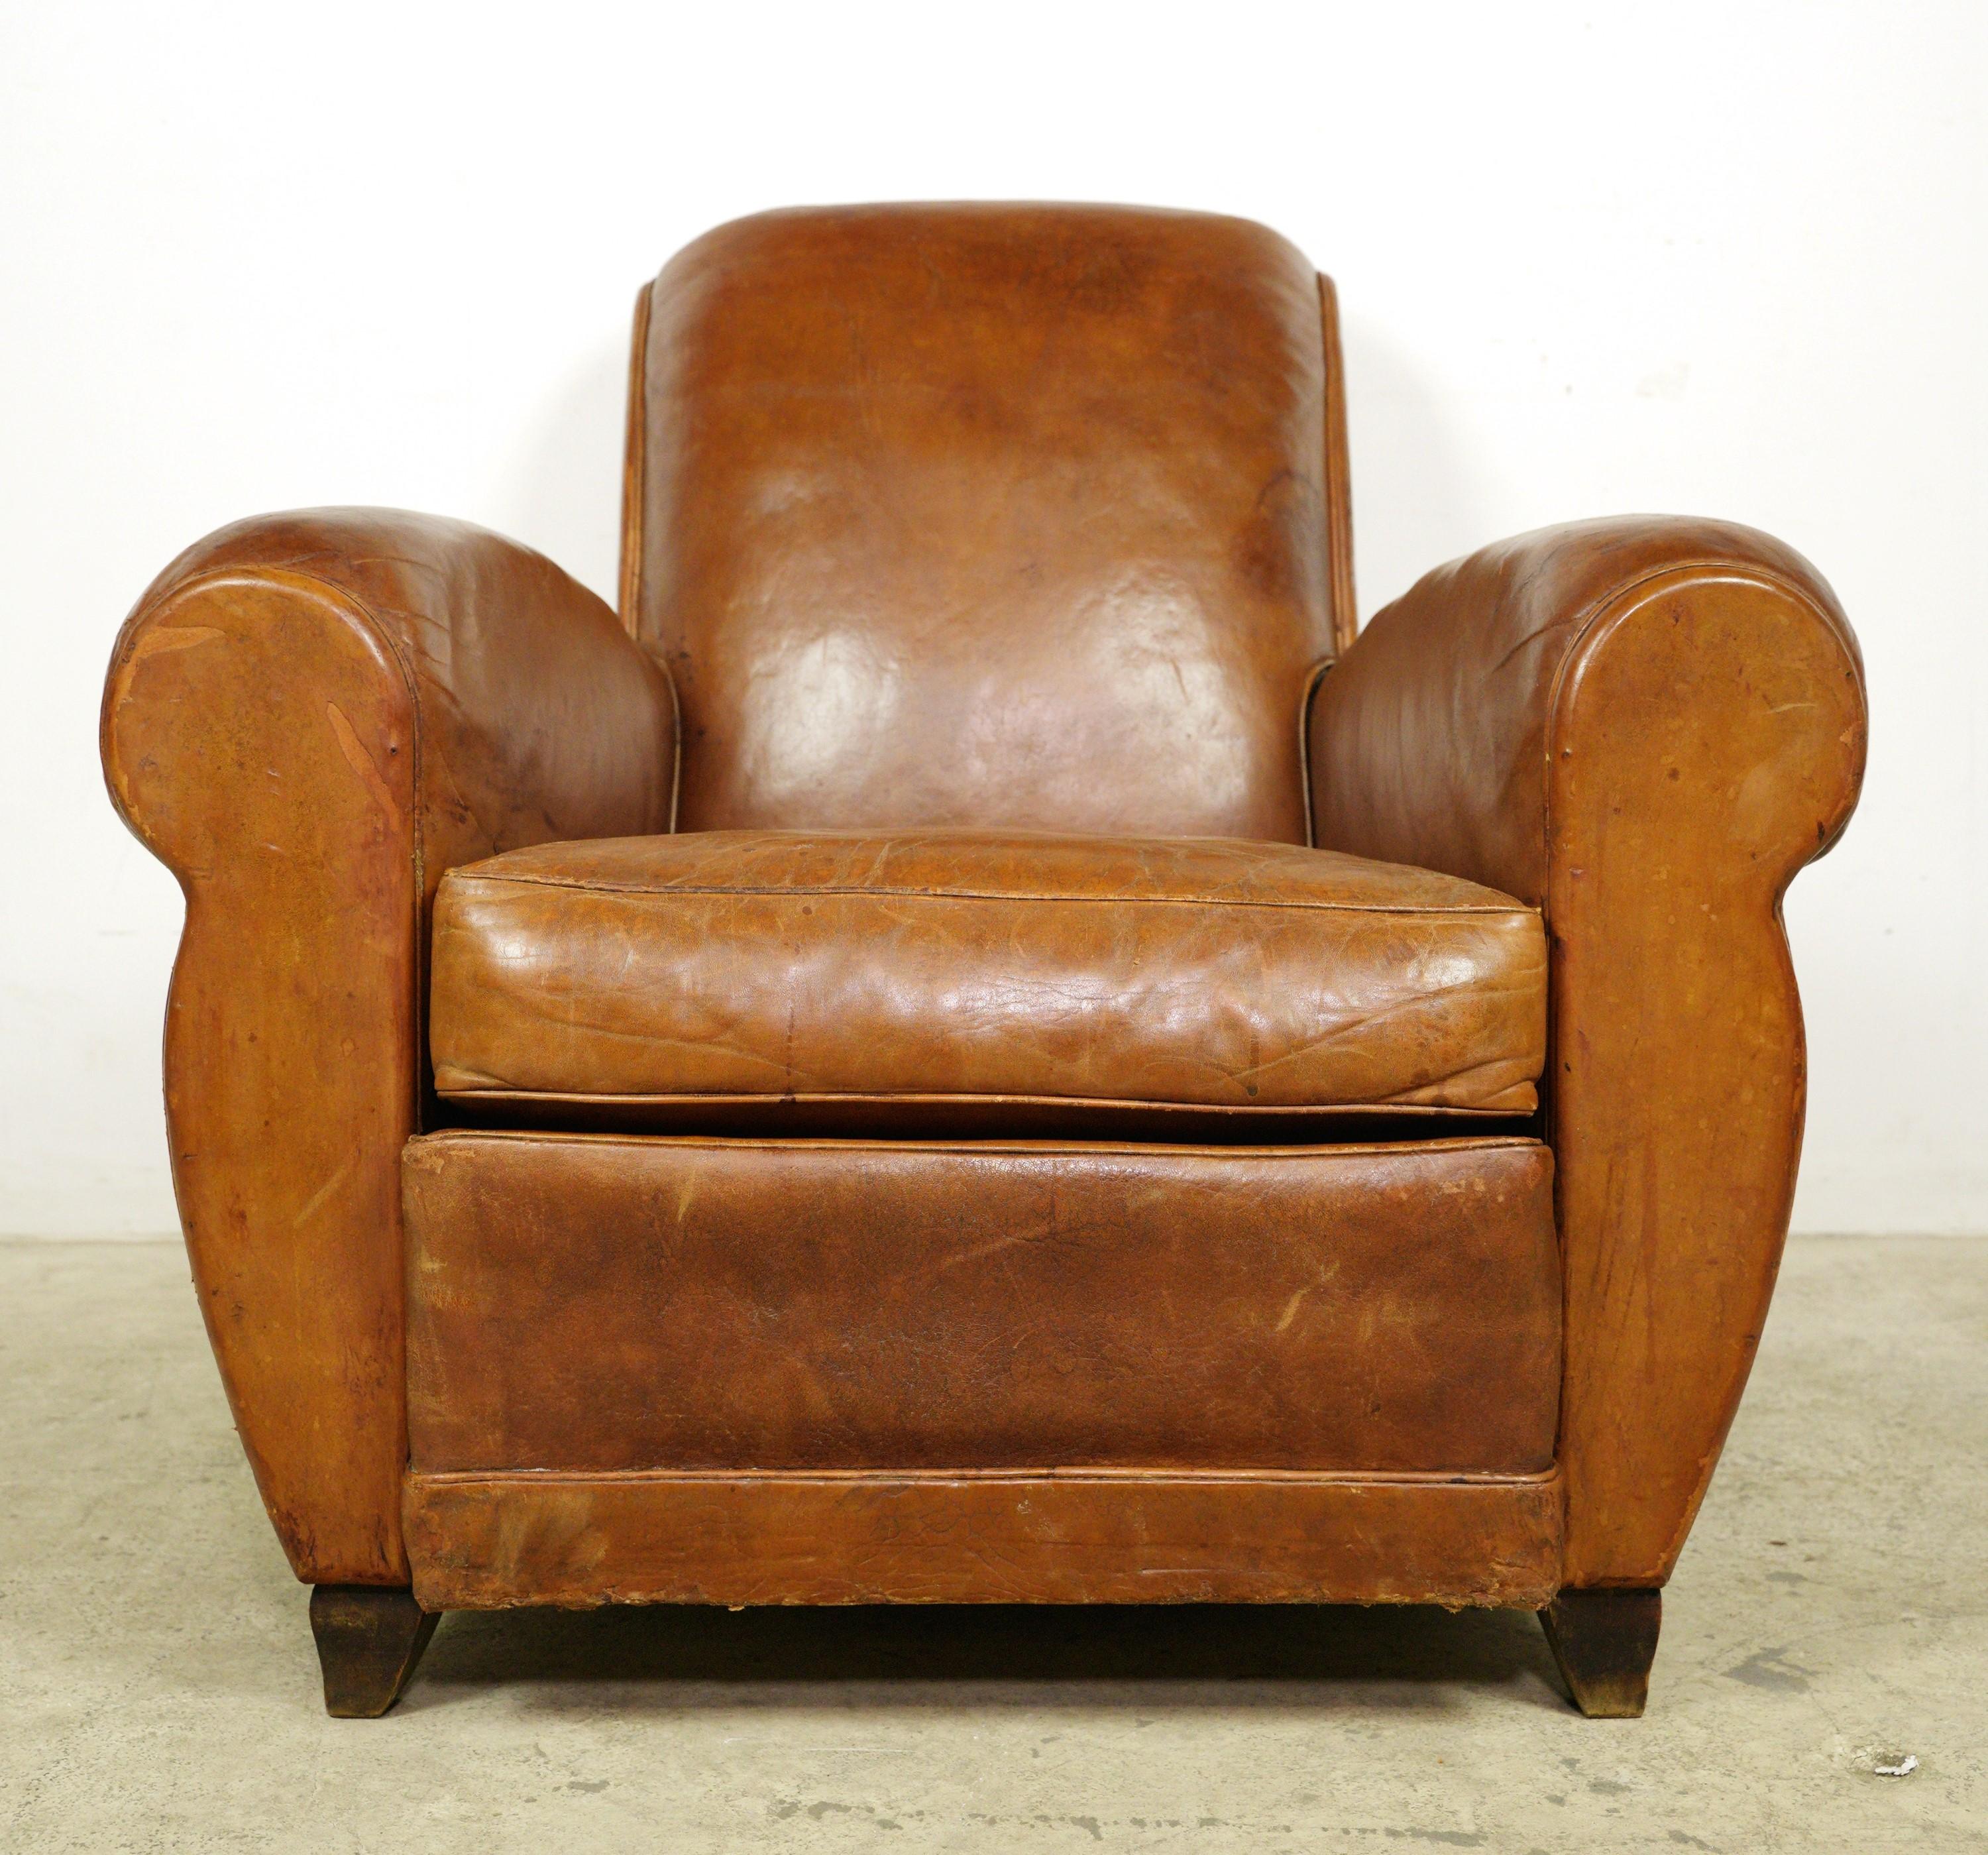 Recently imported from Europe, this pair of vintage brown leather club chairs make a great statement of informal luxury and chic. With a reclined back and oversized arms, the seat is sturdy yet comfortable. The leather is sheepskin with a light